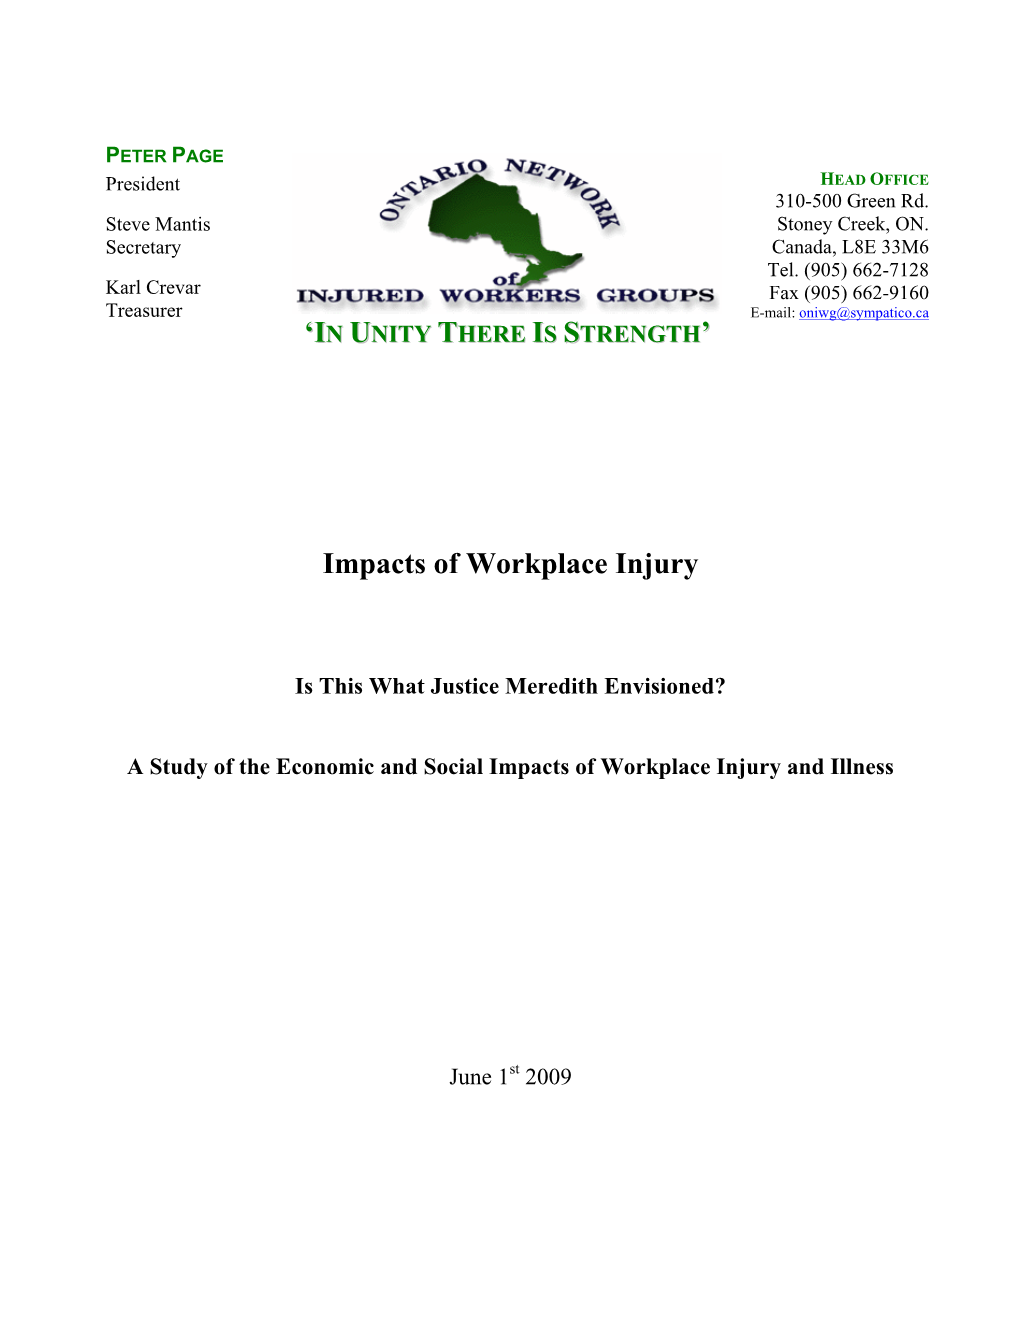 Injured Workers and Poverty Survey 2009 : Impacts of Workplace Injury